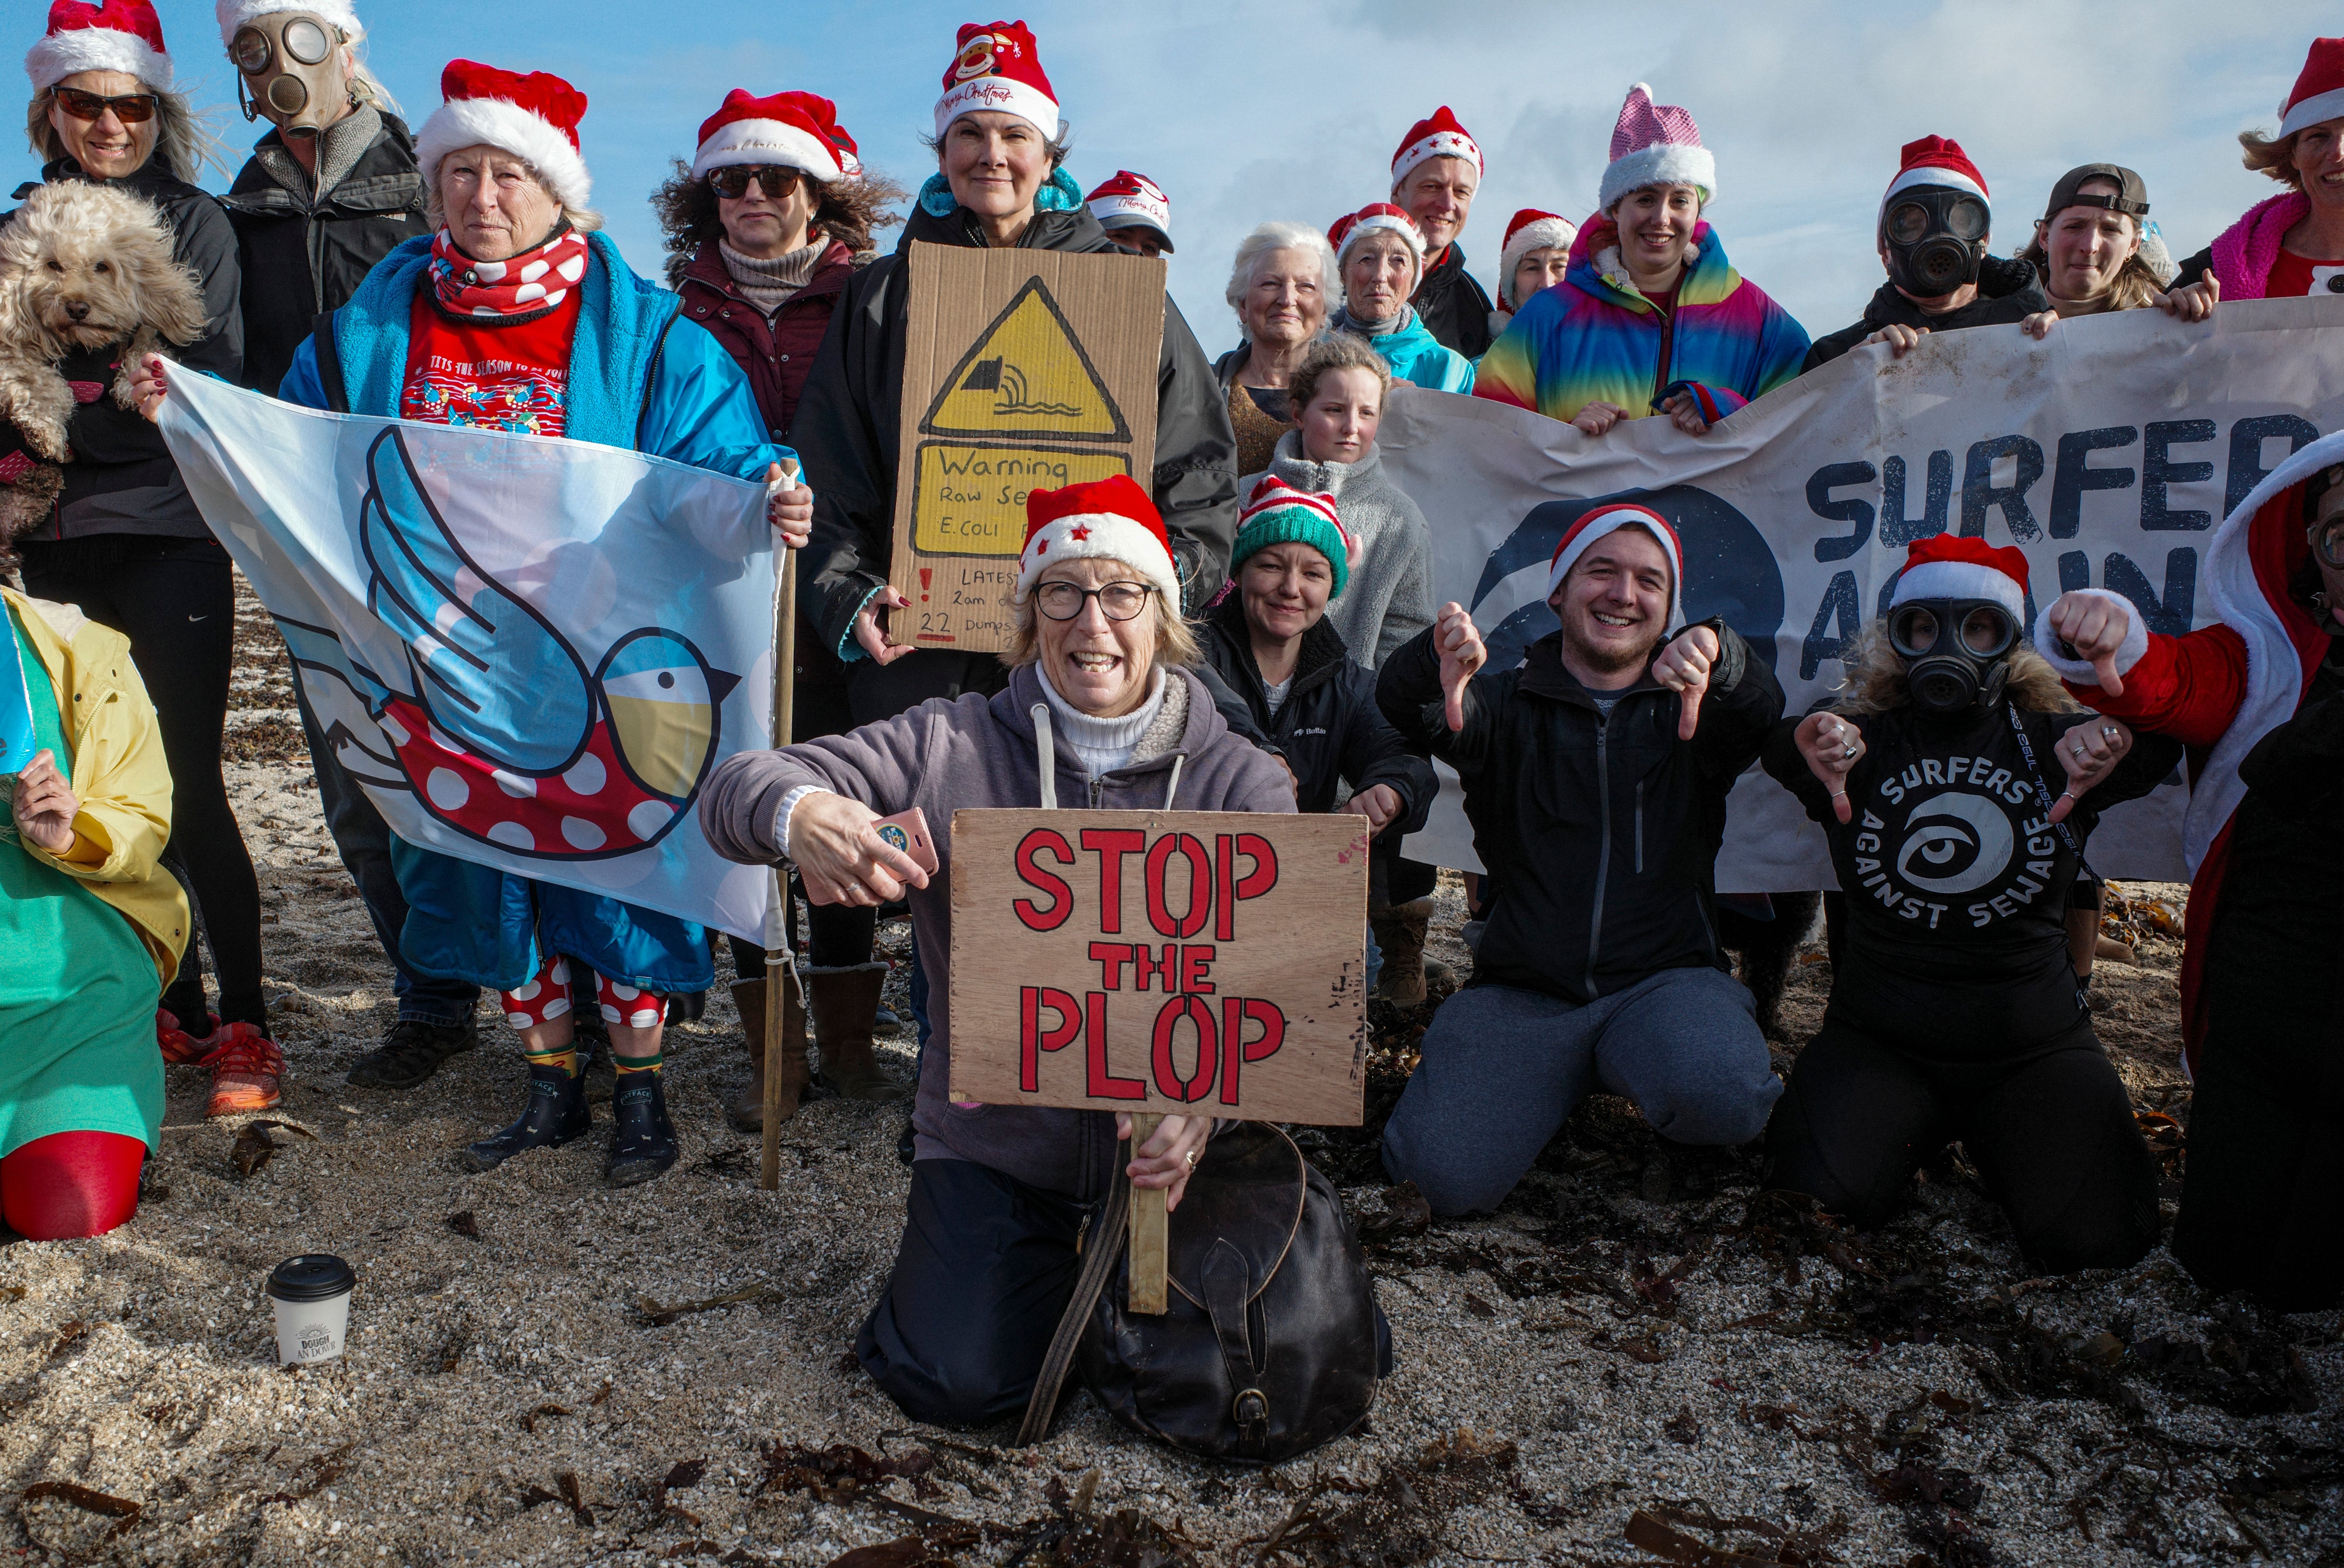 Swimmers around the Cornish coast joined together at Gyllyngvase Beach to protest against the number of sewage discharges. Despite the protest taking place at the beach, the quality of bathing water off it is judged to be excellent.